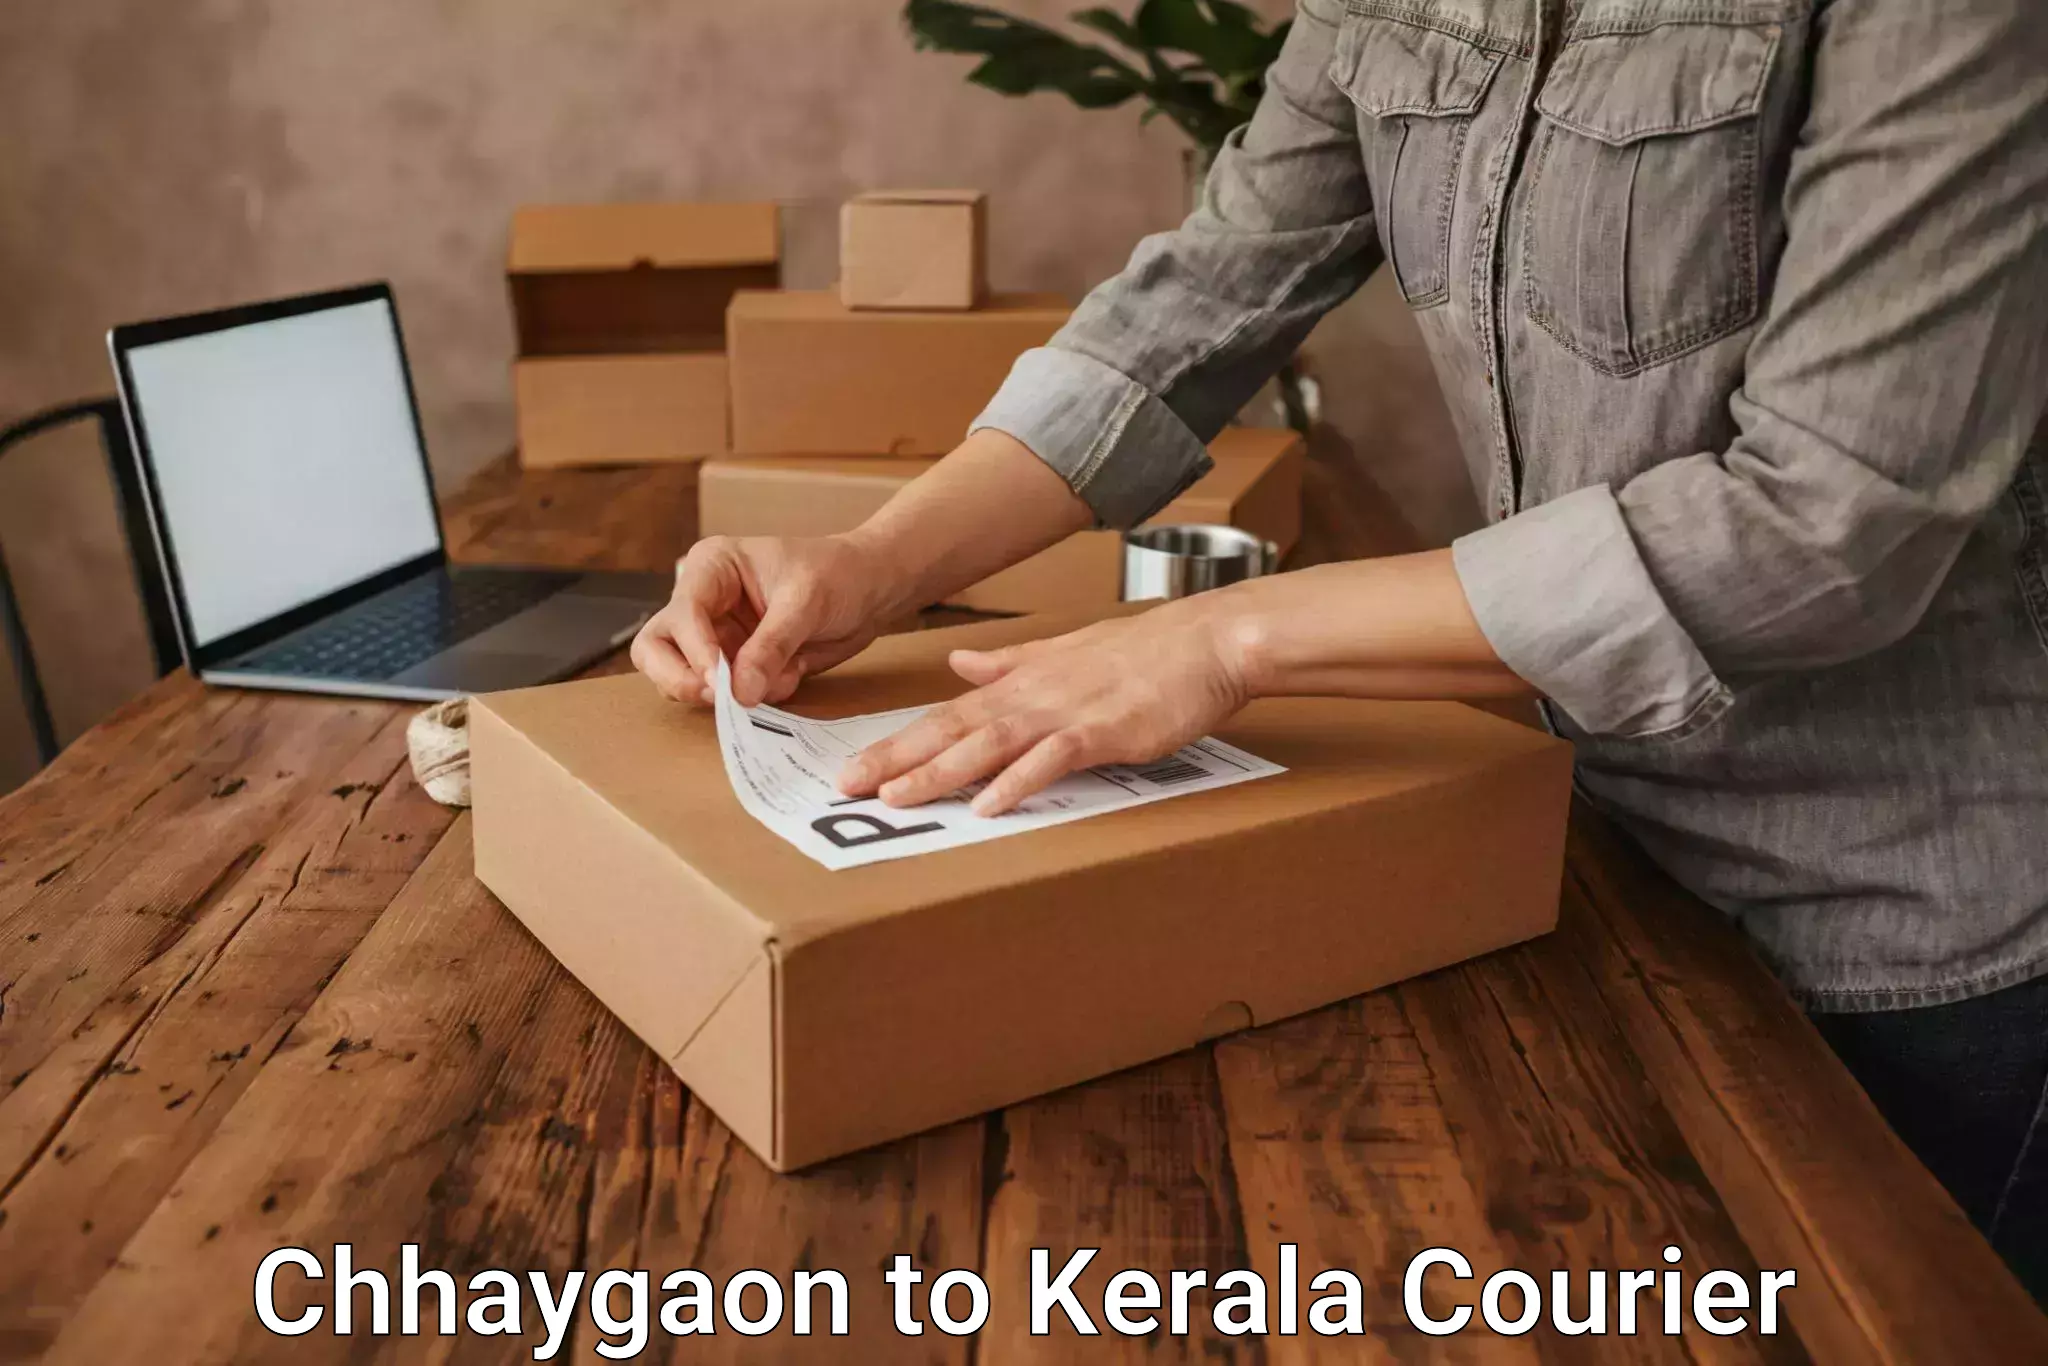 Local delivery service Chhaygaon to Kerala